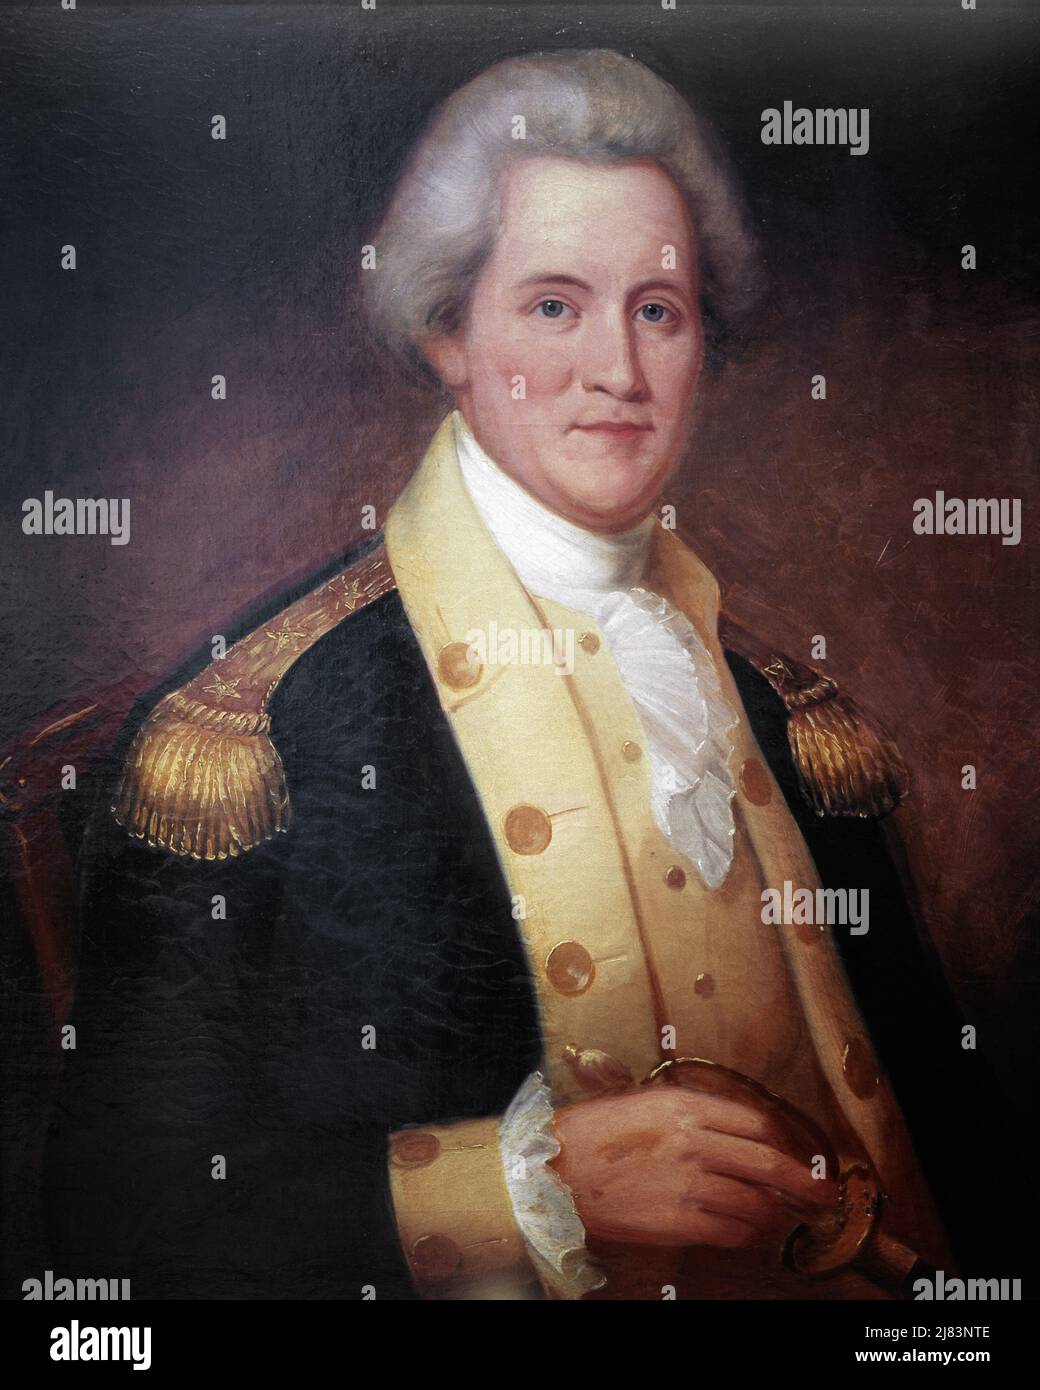 1700s PORTRAIT OF COLONEL JOHN SEVIER COMMANDER USA TROOPS AT KINGS MOUNTAIN AMERICAN REVOLUTION WAR LATER GOVERNOR OF TENNESSEE - ka4108 WLL002 HARS LEADERSHIP AT OF 1776 LATER OCCUPATIONS POLITICS TROOPS UNIFORMS WAR OF INDEPENDENCE COLONEL STYLISH REVOLT AMERICAN REVOLUTIONARY WAR COMMANDER 1770s COLONIES FRONTIERSMAN TENNESSEE 1700s 1780 CAUCASIAN ETHNICITY GOVERNOR KINGS OLD FASHIONED Stock Photo